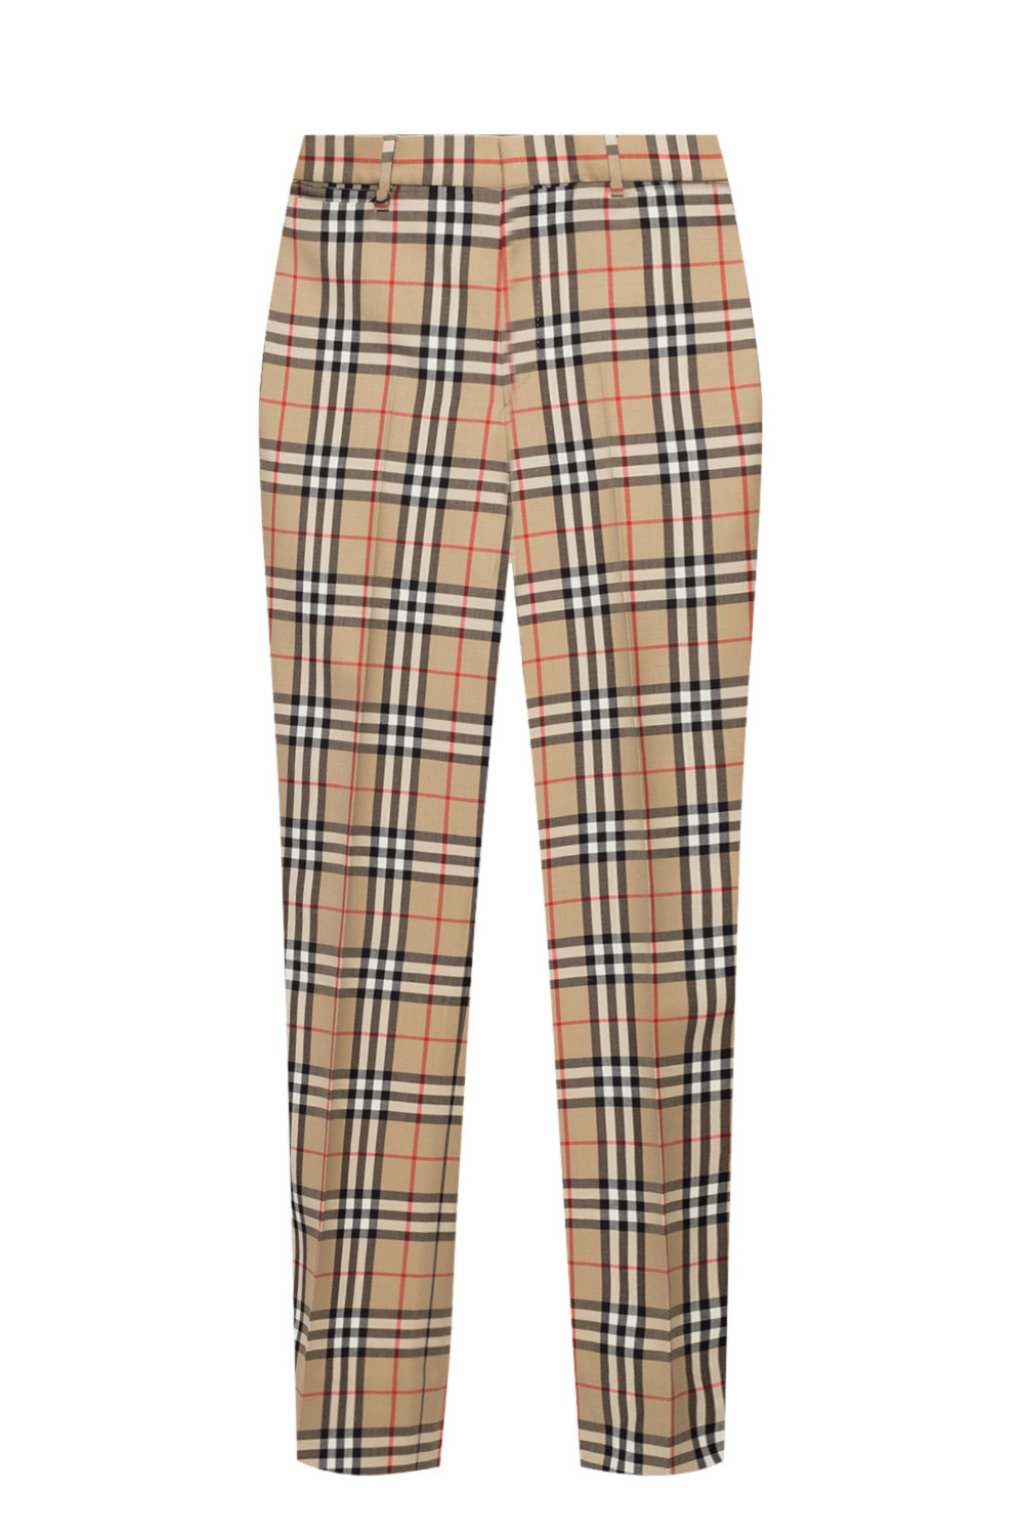 Checked trousers Burberry - Vitkac US